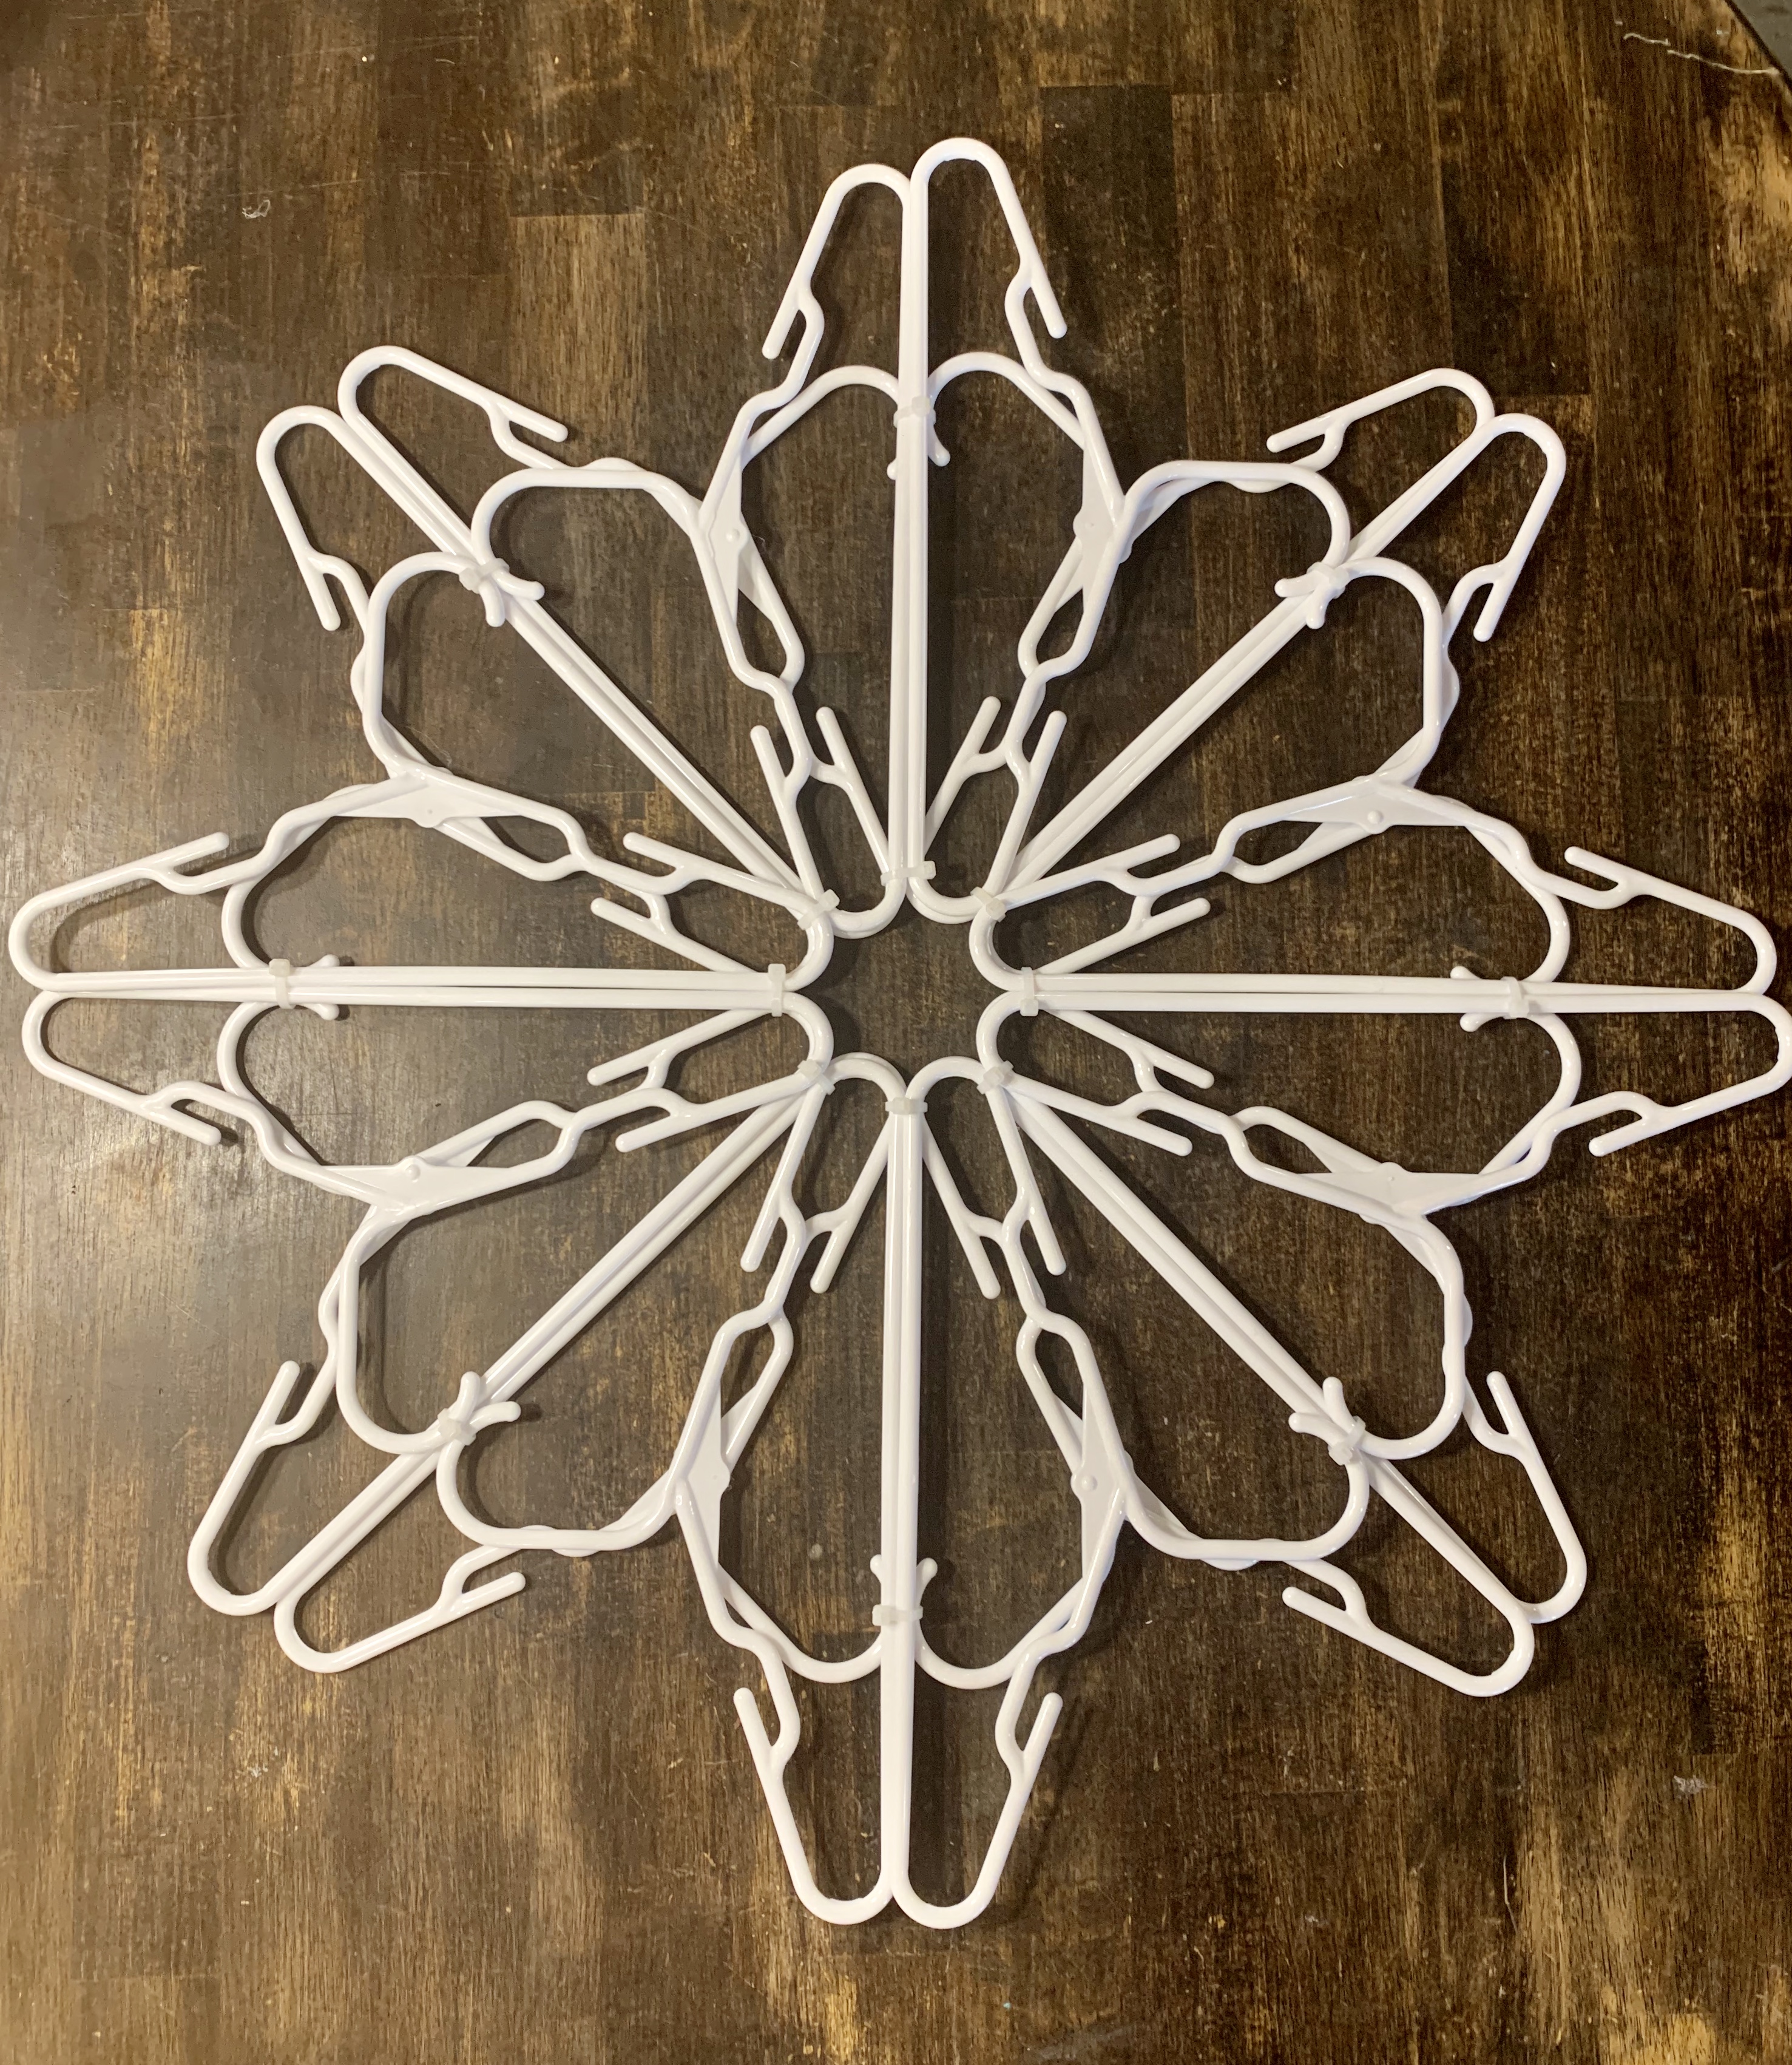 You will not believe how easy these snowflakes are to make. Not to mention, everyone will love them. Check out my easy tutorial for this plastic hanger snowflake DIY.